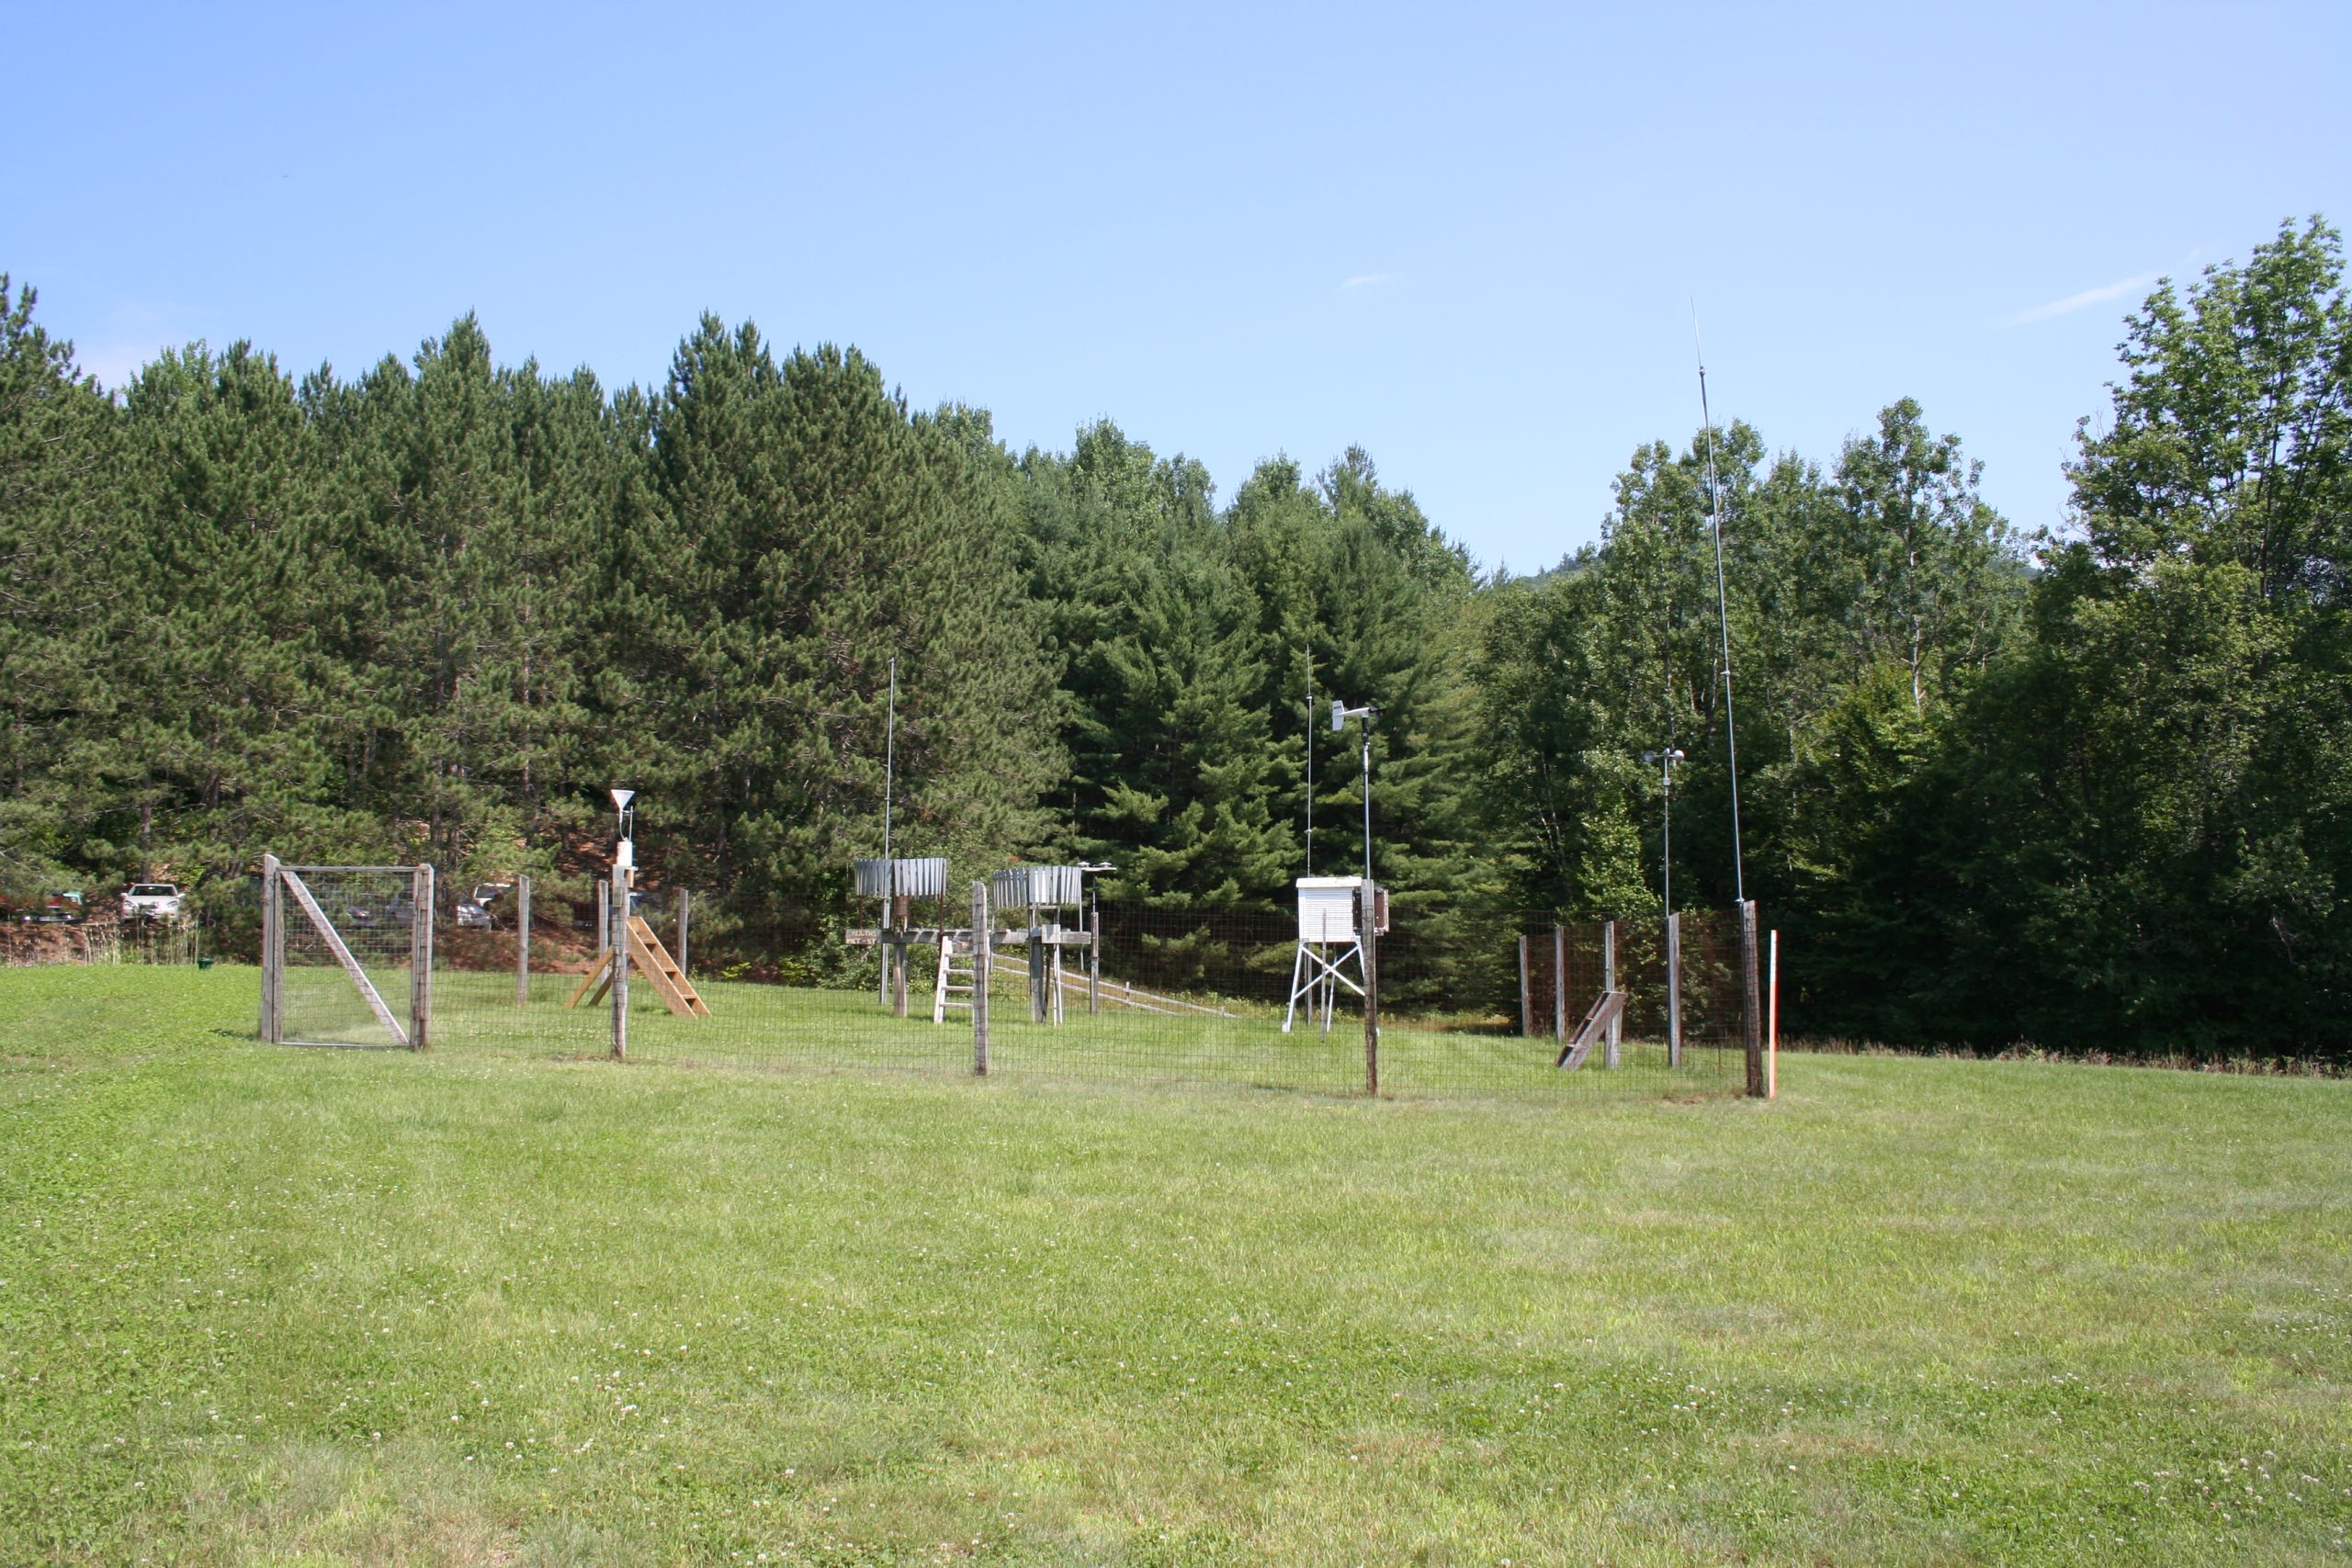 Weather station at the Hubbard Brook U.S. Forest Service Station